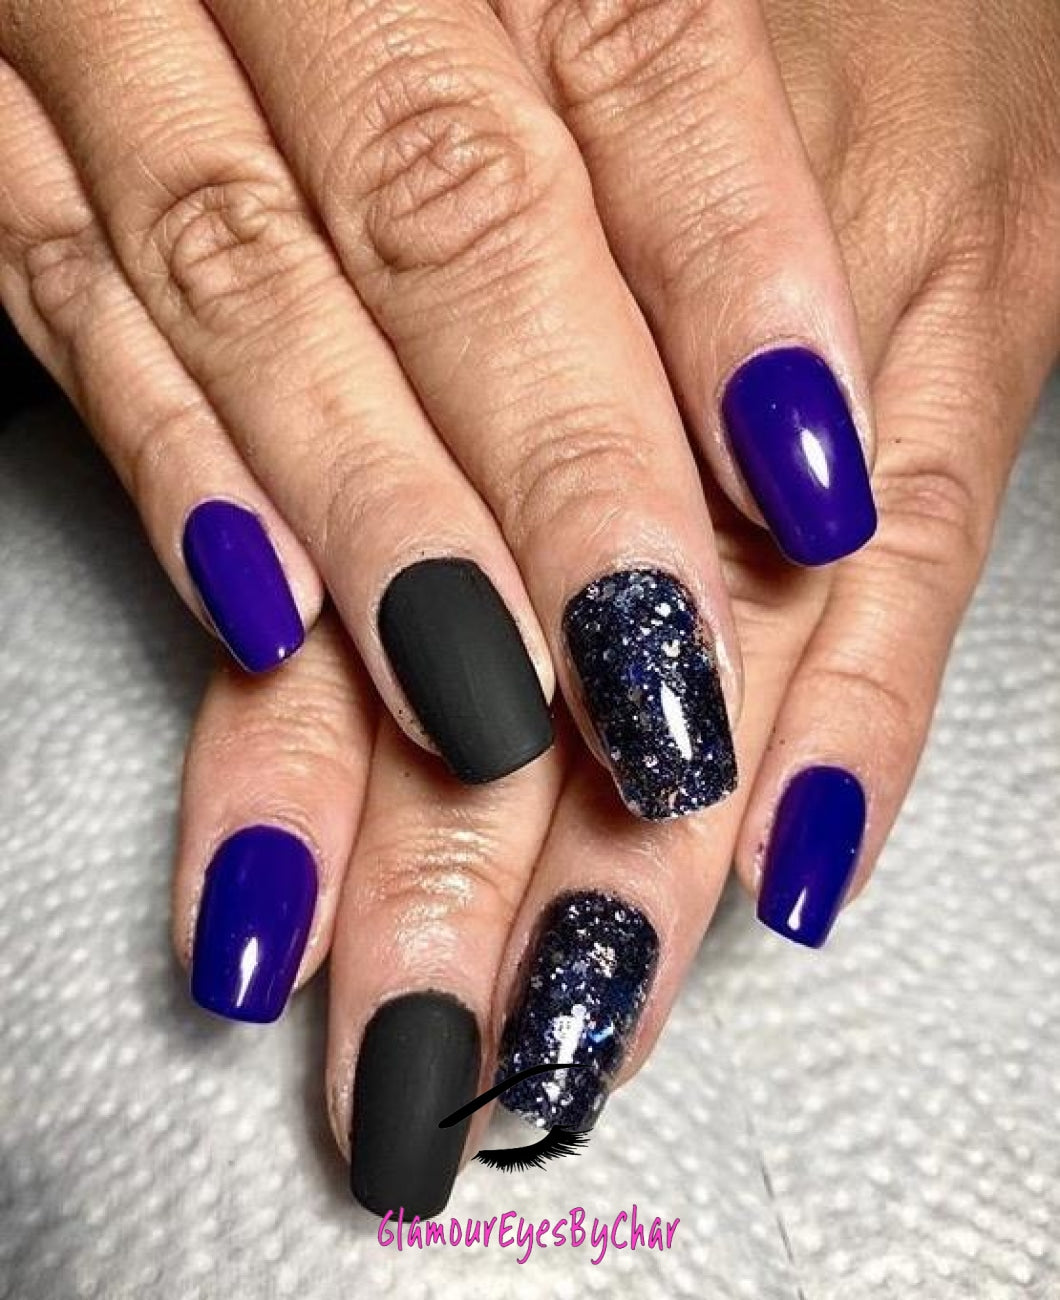 This glitter is called Black Orchid and is part of the super chunky glitter collection.  It consists of navy blue/black glitter with a silver and lighter blue holographic sparkle. Black Orchid can be used for your face, body, hair and nails.